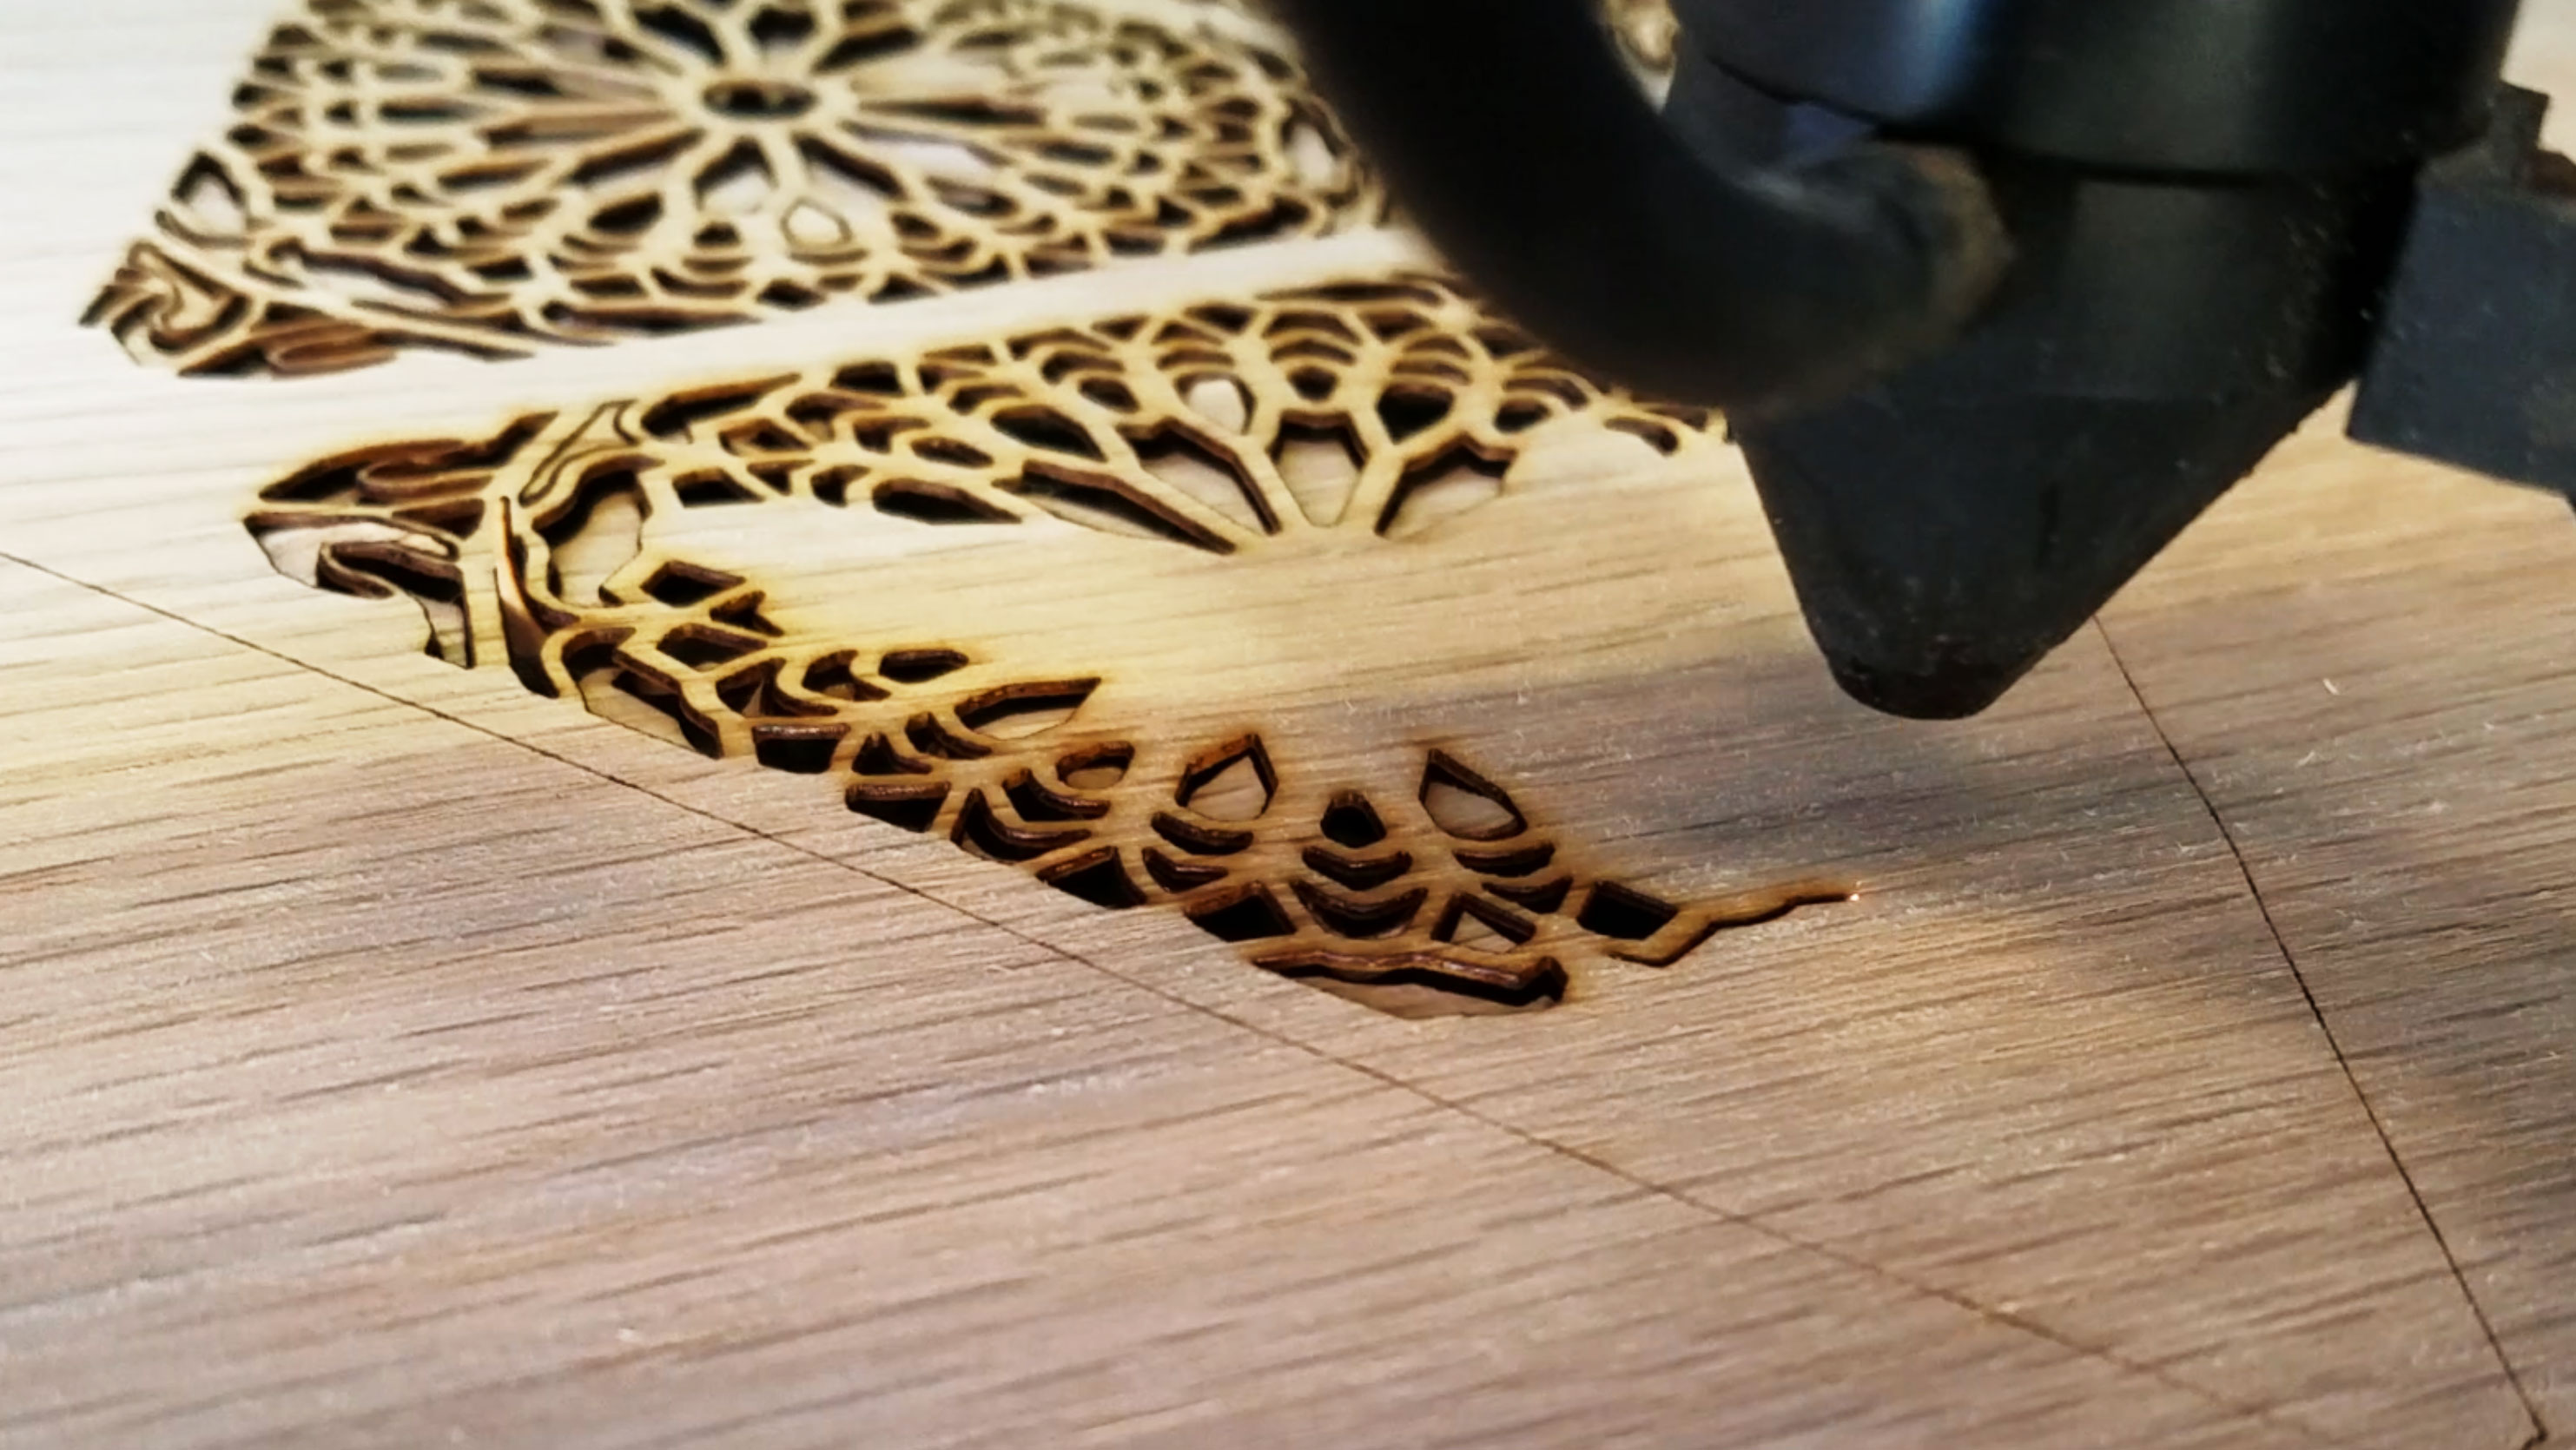 laser machine cutting shapes into wood.